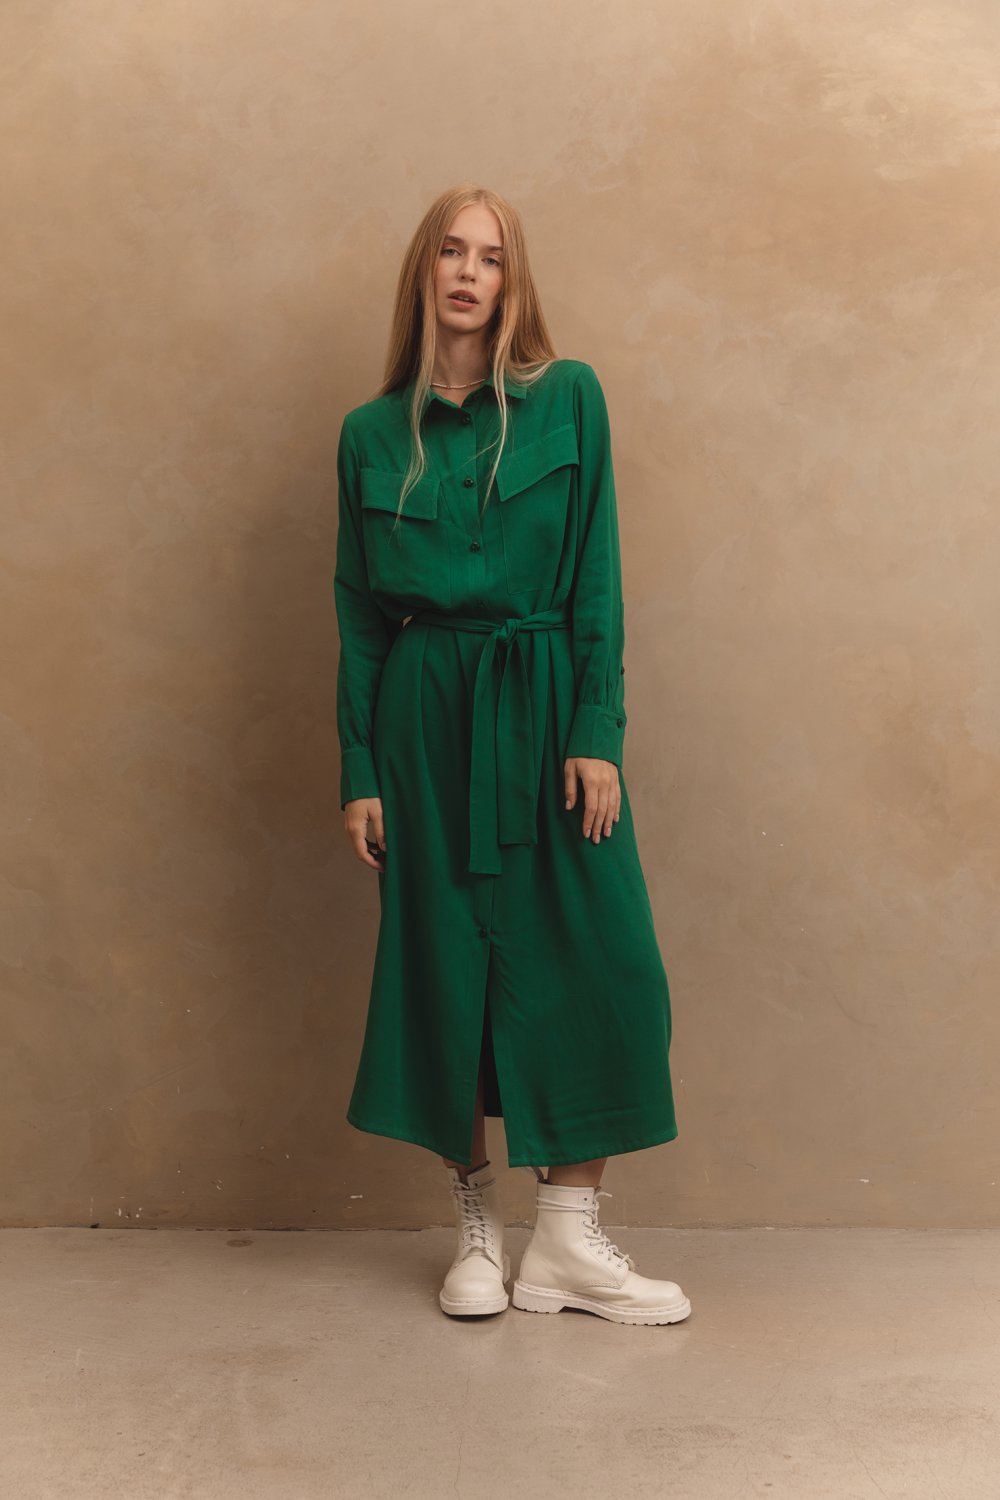 Green slip dress with patch pockets